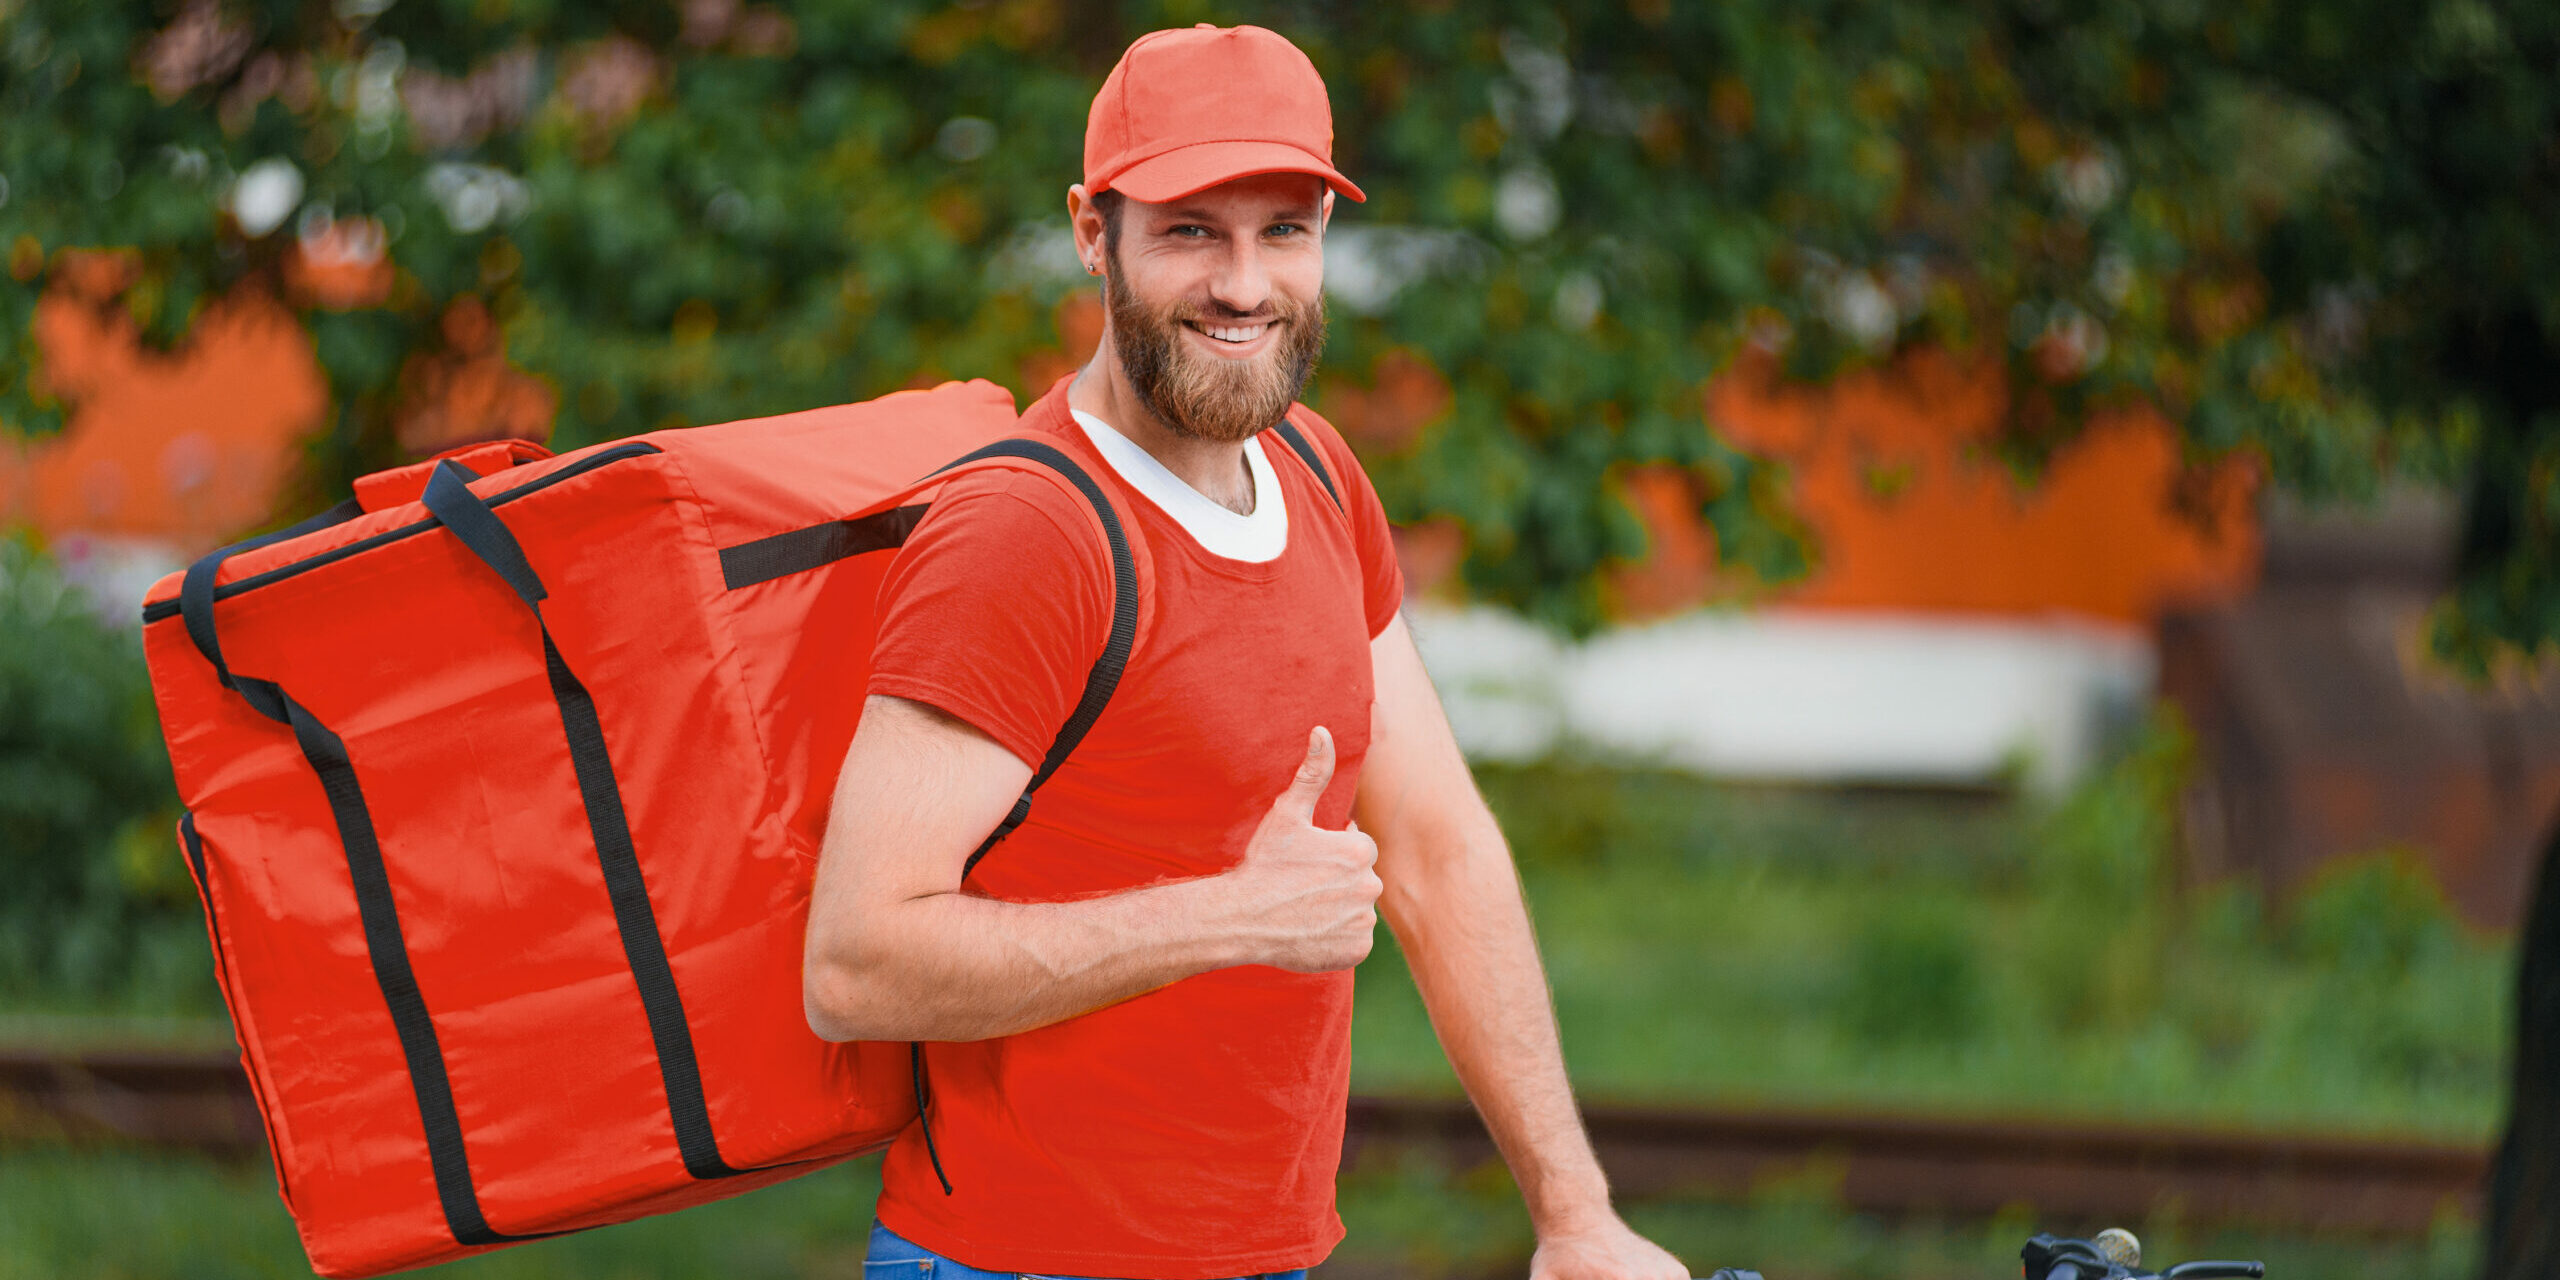 Food delivery man in red uniform with food delivery bag on his back smiling and showing thumb up